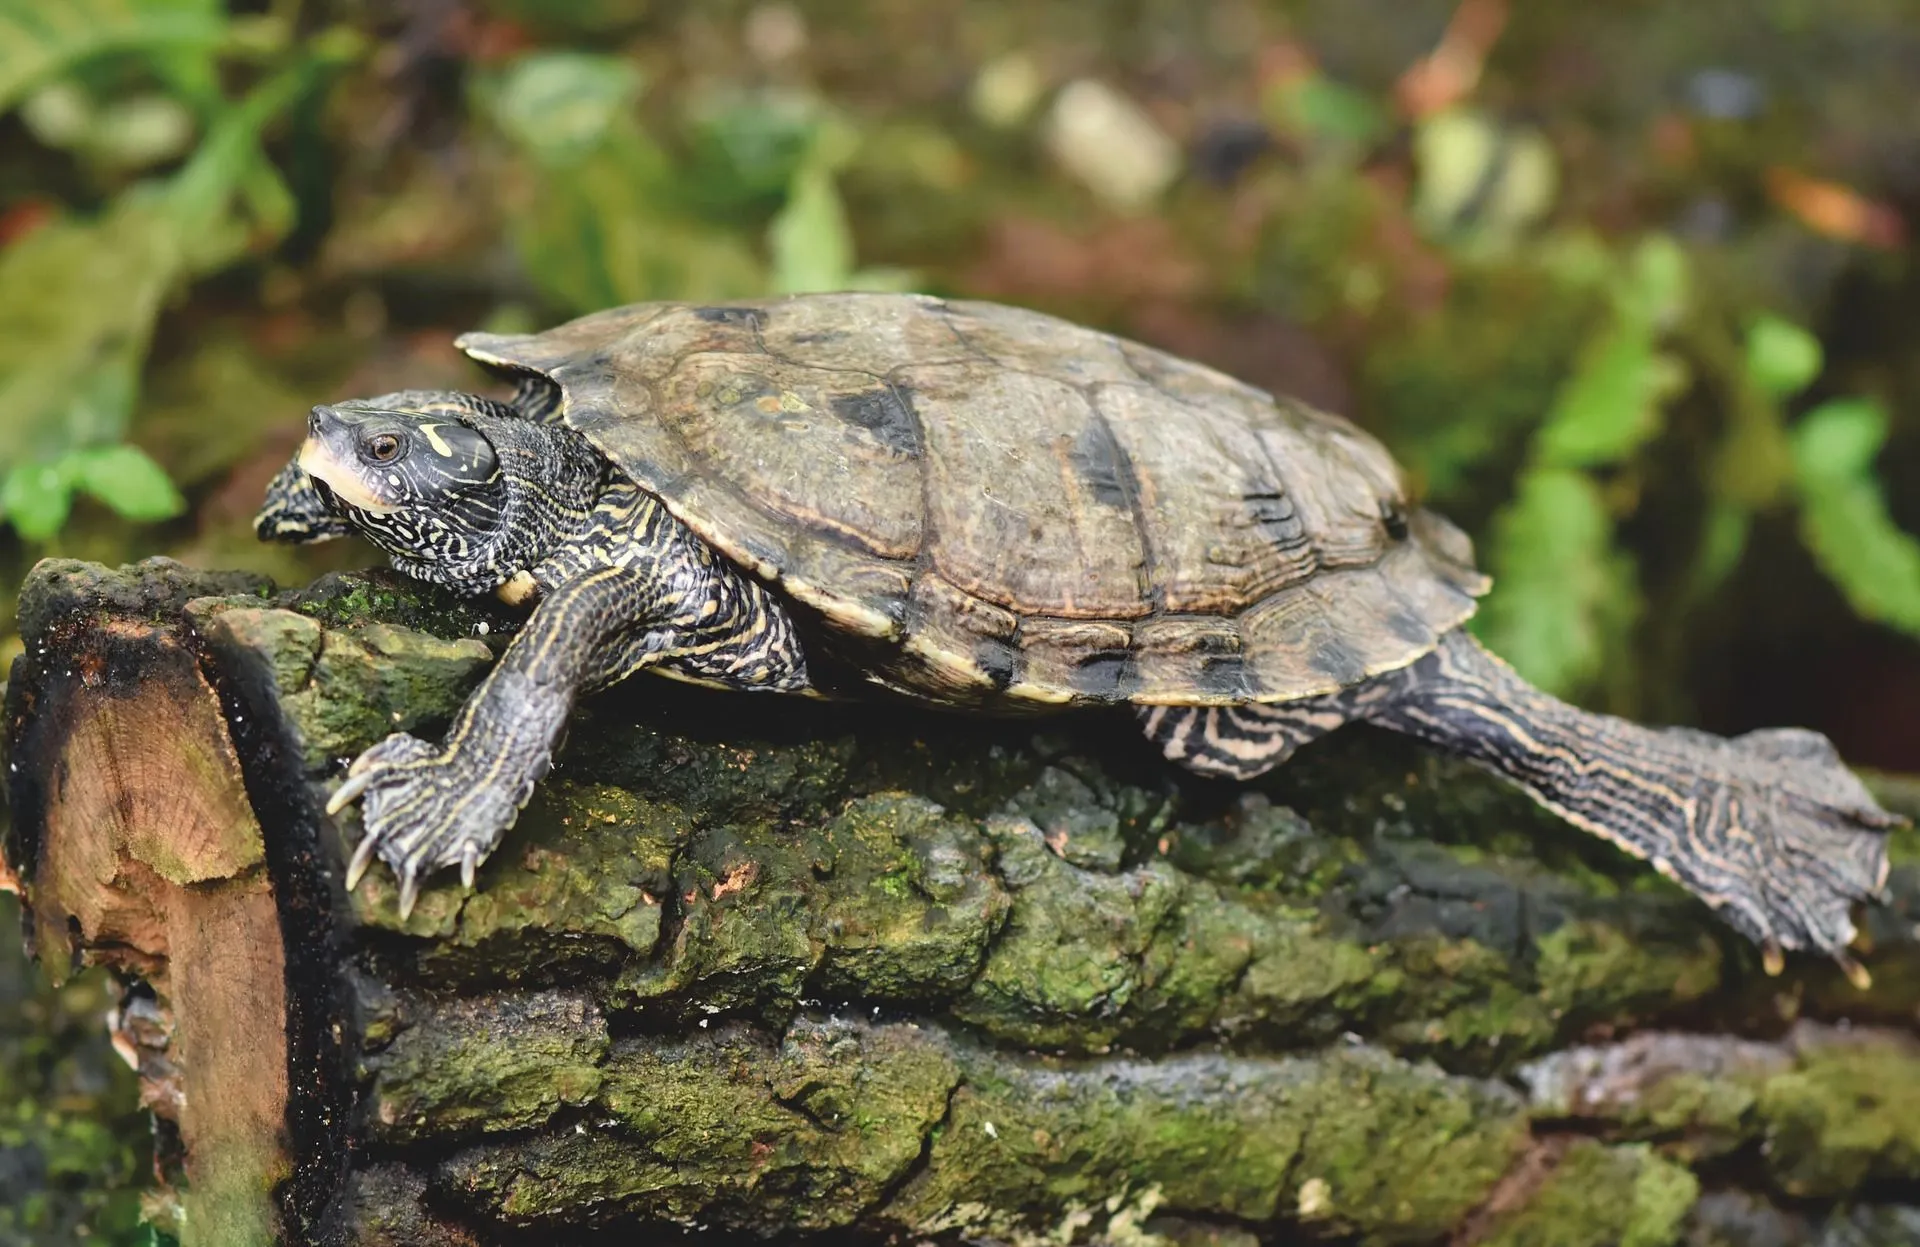 The Russian tortoise lifespan depends on the habitat of this Russian tortoise species.